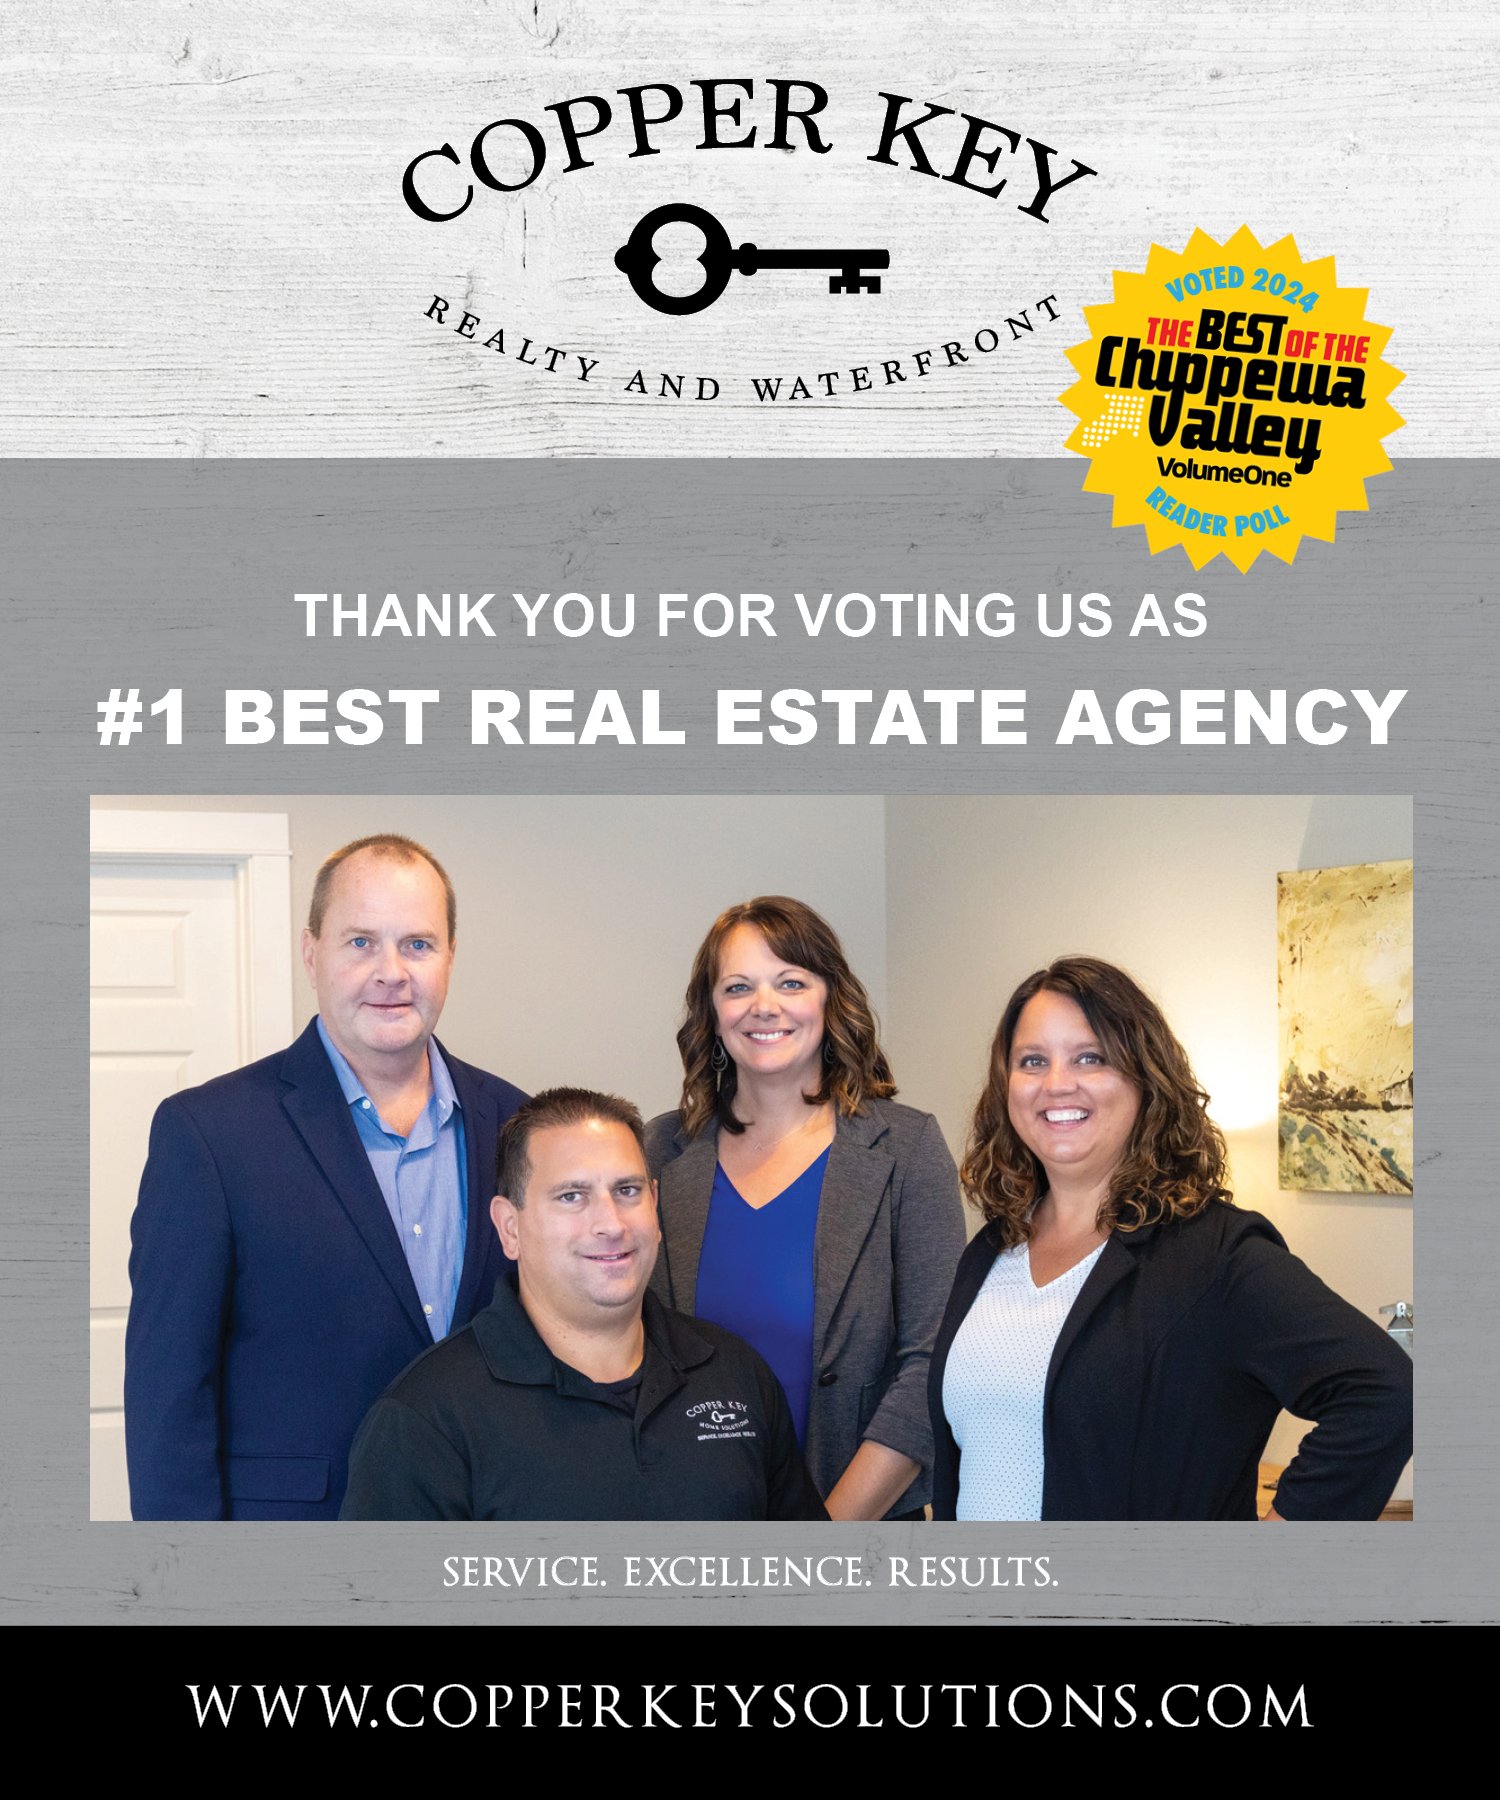 We are so honored and grateful to have been awarded Volume One's - The Best of the Chippewa Valley - #𝟏 𝐑𝐞𝐚𝐥 𝐄𝐬𝐭𝐚𝐭𝐞 𝐀𝐠𝐞𝐧𝐜𝐲 for 2024. Our team has been blessed to have helped so many people with their real estate needs throughout the 